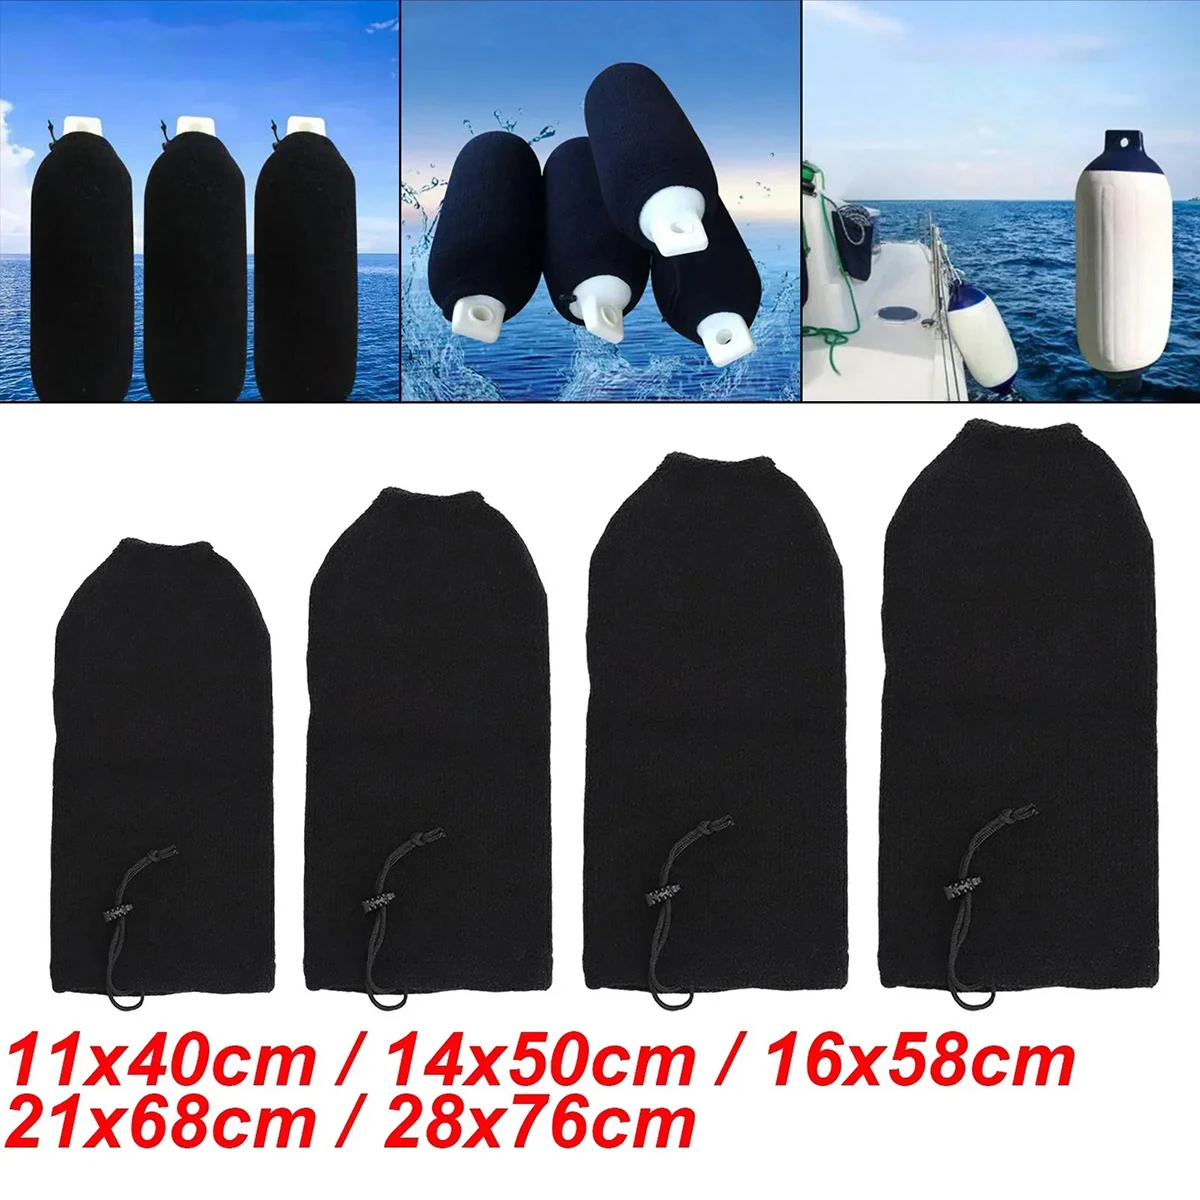 Boat Fender Cover Protector Anti-Collision Ball Sleeve Protection Marine Yacht Bumper Cover 11x40cm/14x50cm/16x58cm/21x68cm